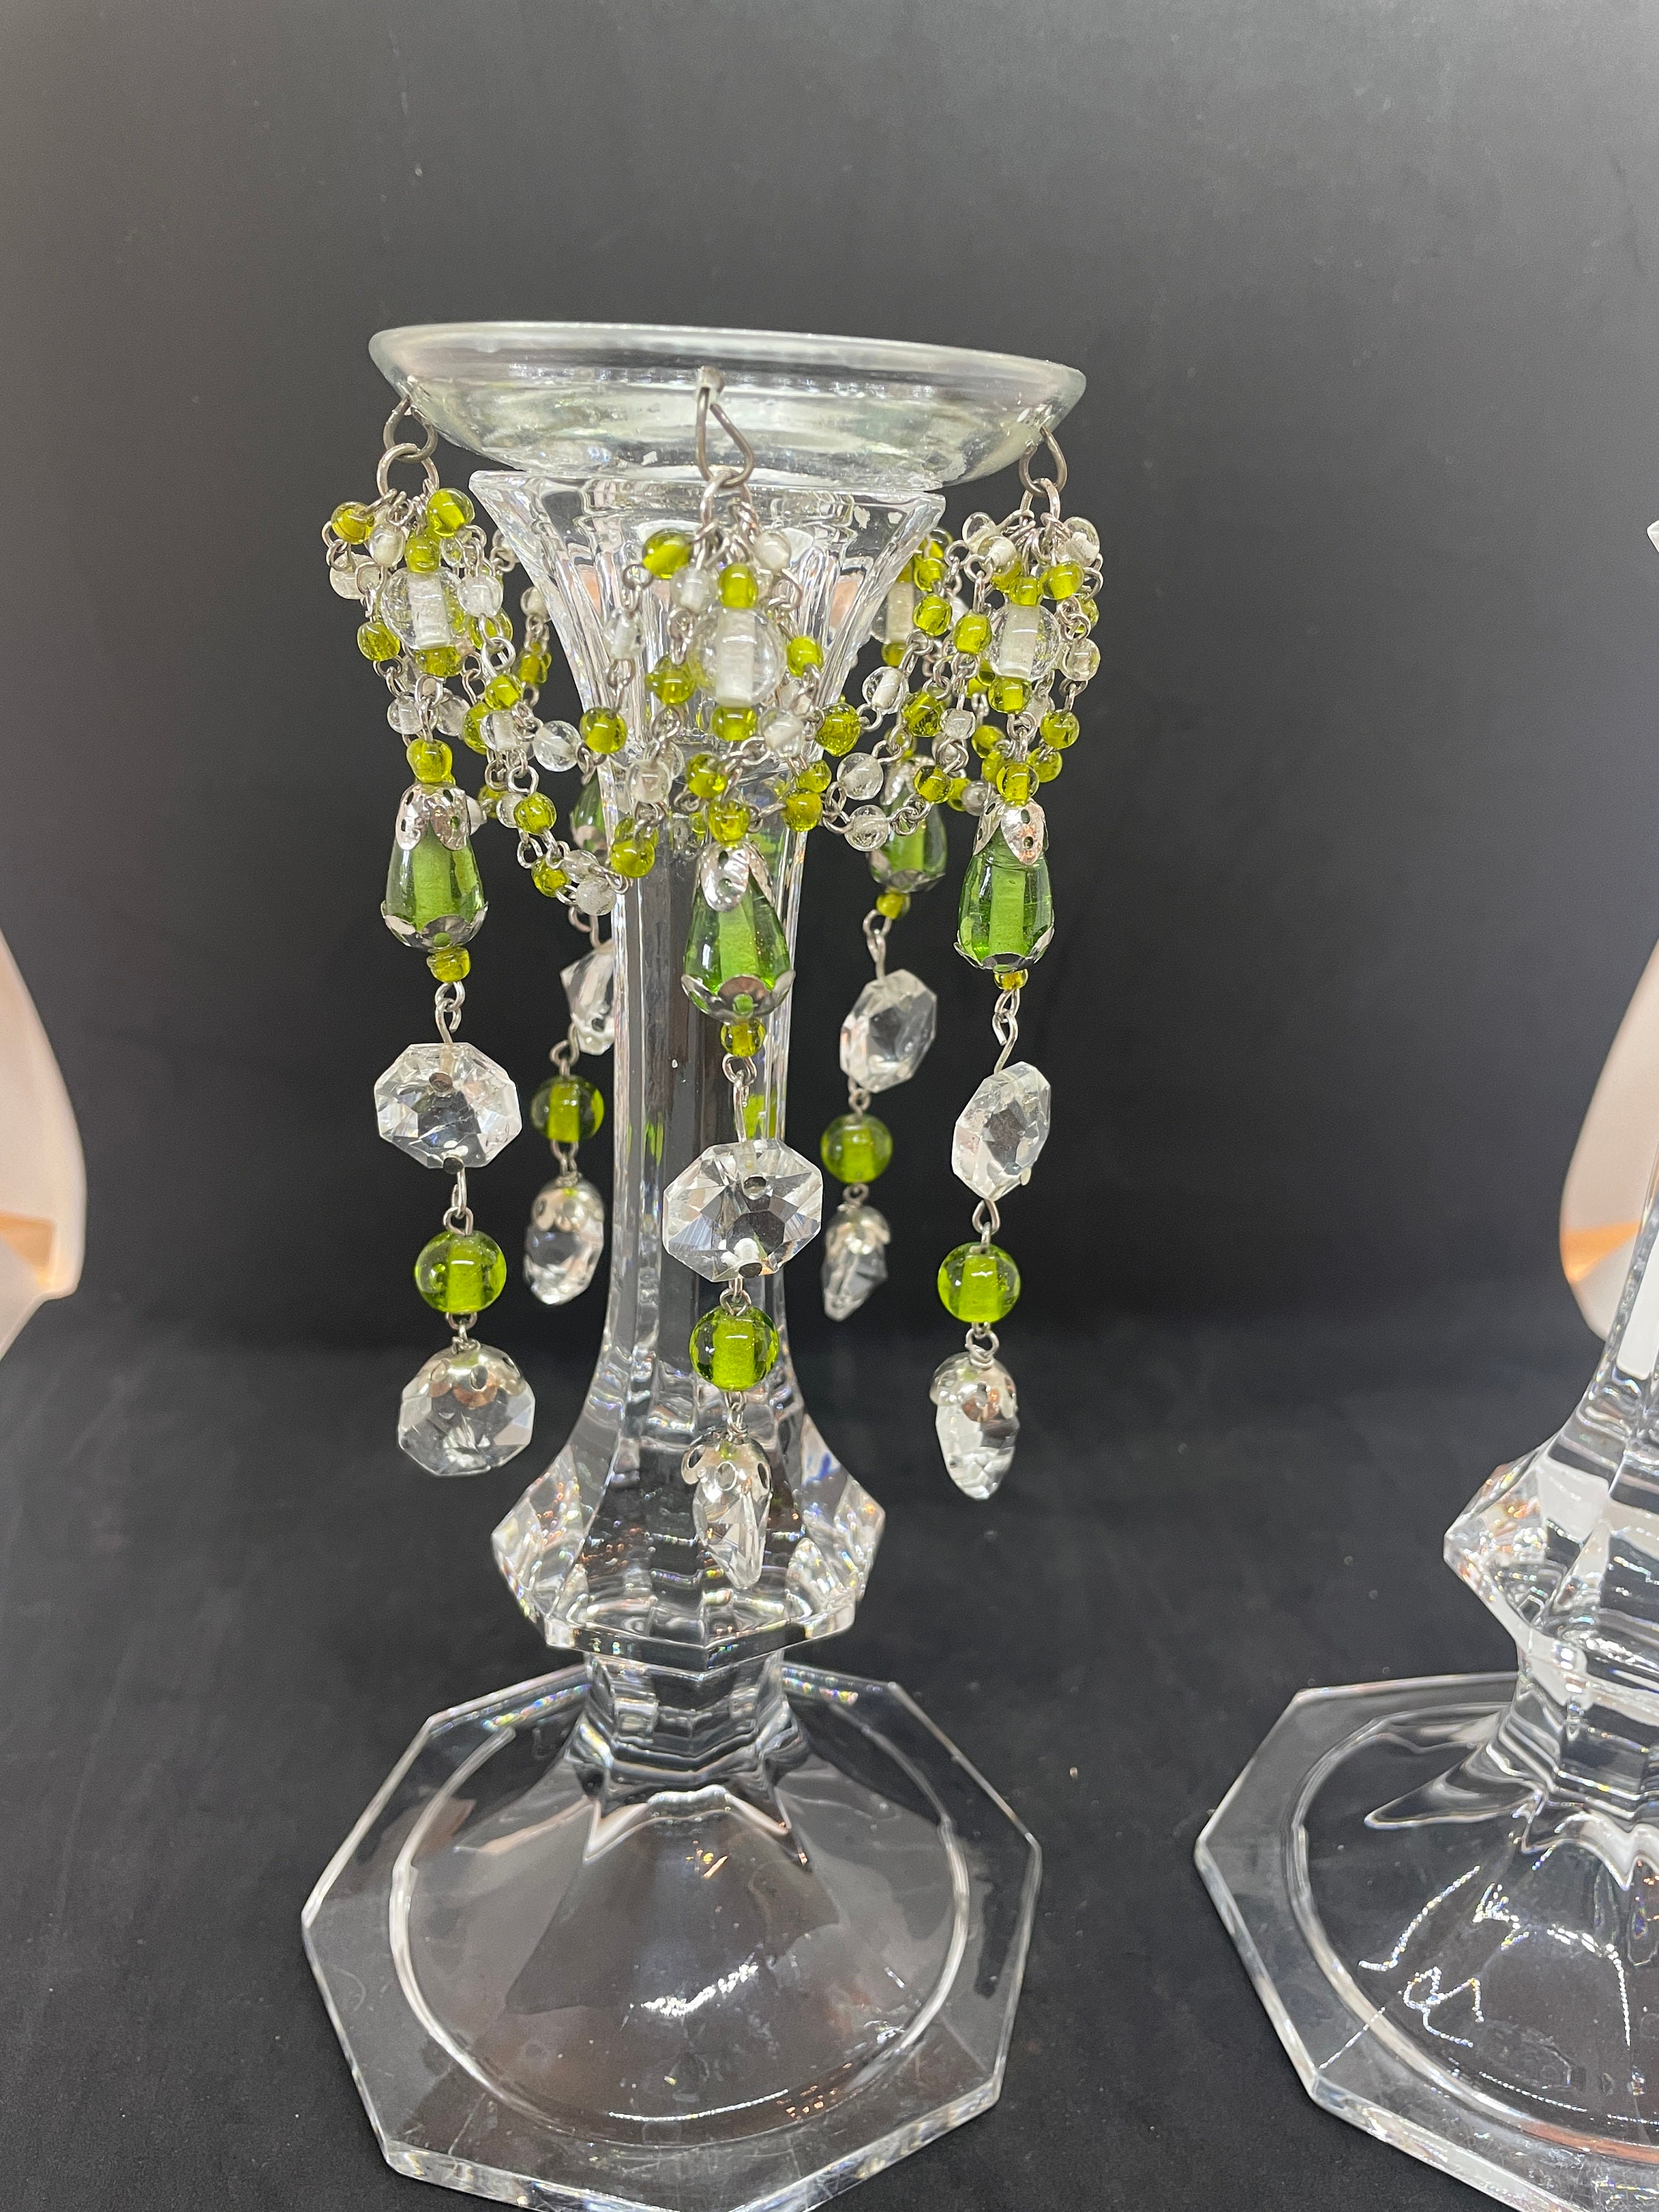 Glass Bobeche 4 Pc With Prisms, Glass Candle Collars for Drips